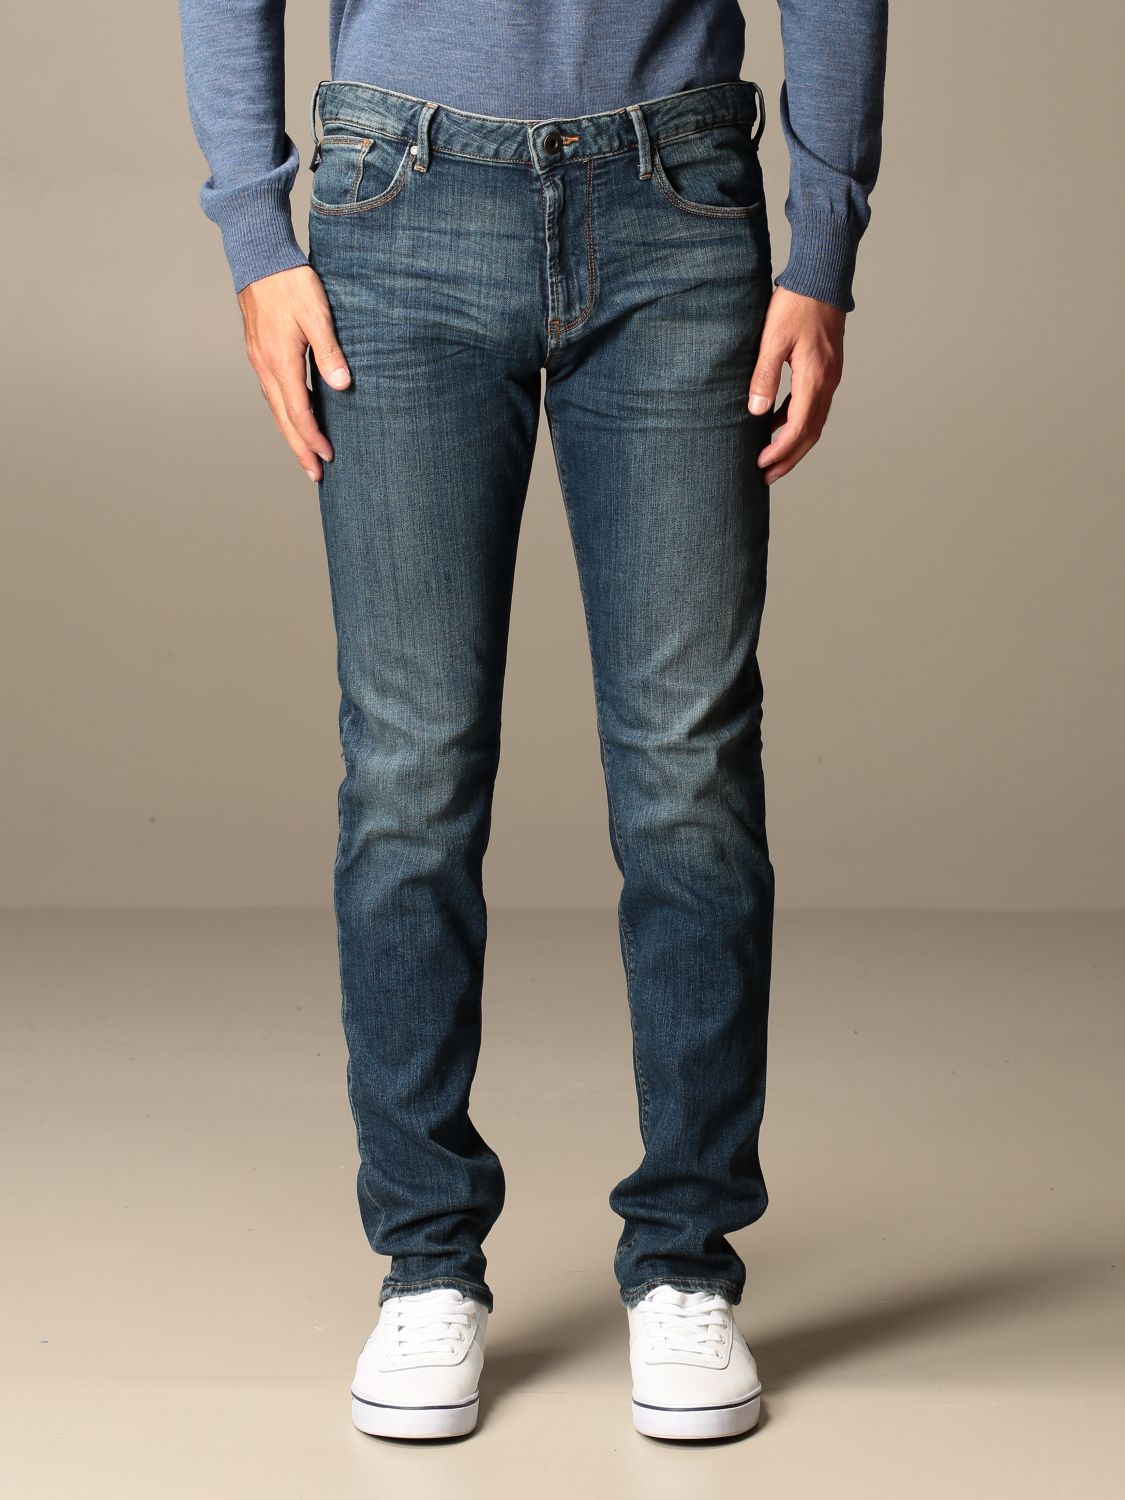 Armani Outlet: slim fit stretch jeans | Jeans Emporio Armani Men Denim | Jeans Emporio Armani 8N1J06 1V0MZ GIGLIO.COM